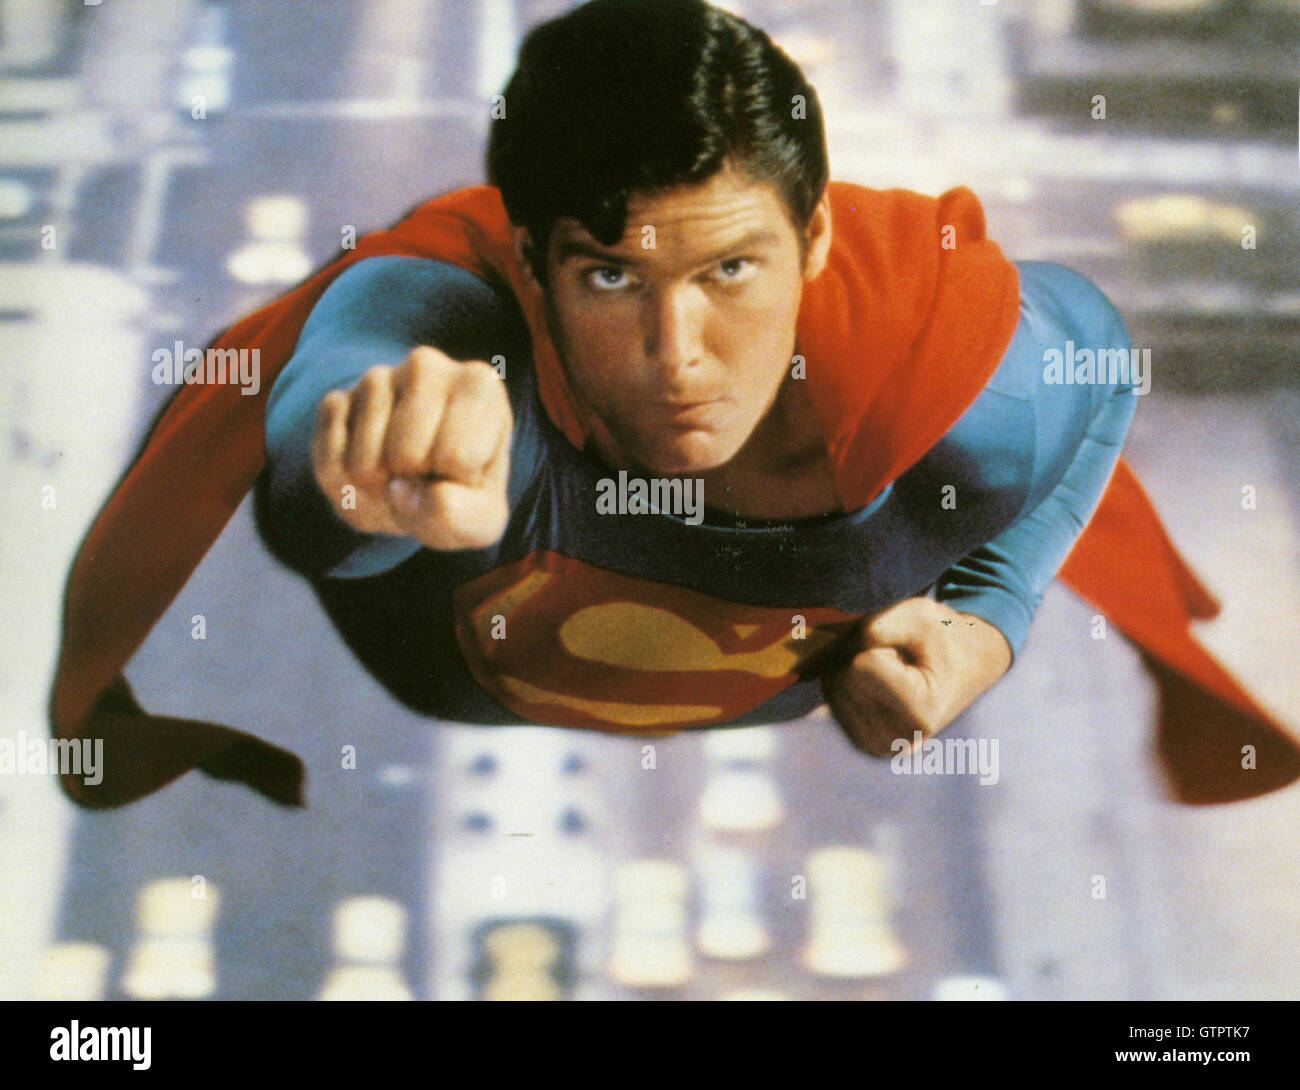 SUPERMAN 1978 Warner Bros film with Christopher Reeve Stock Photo